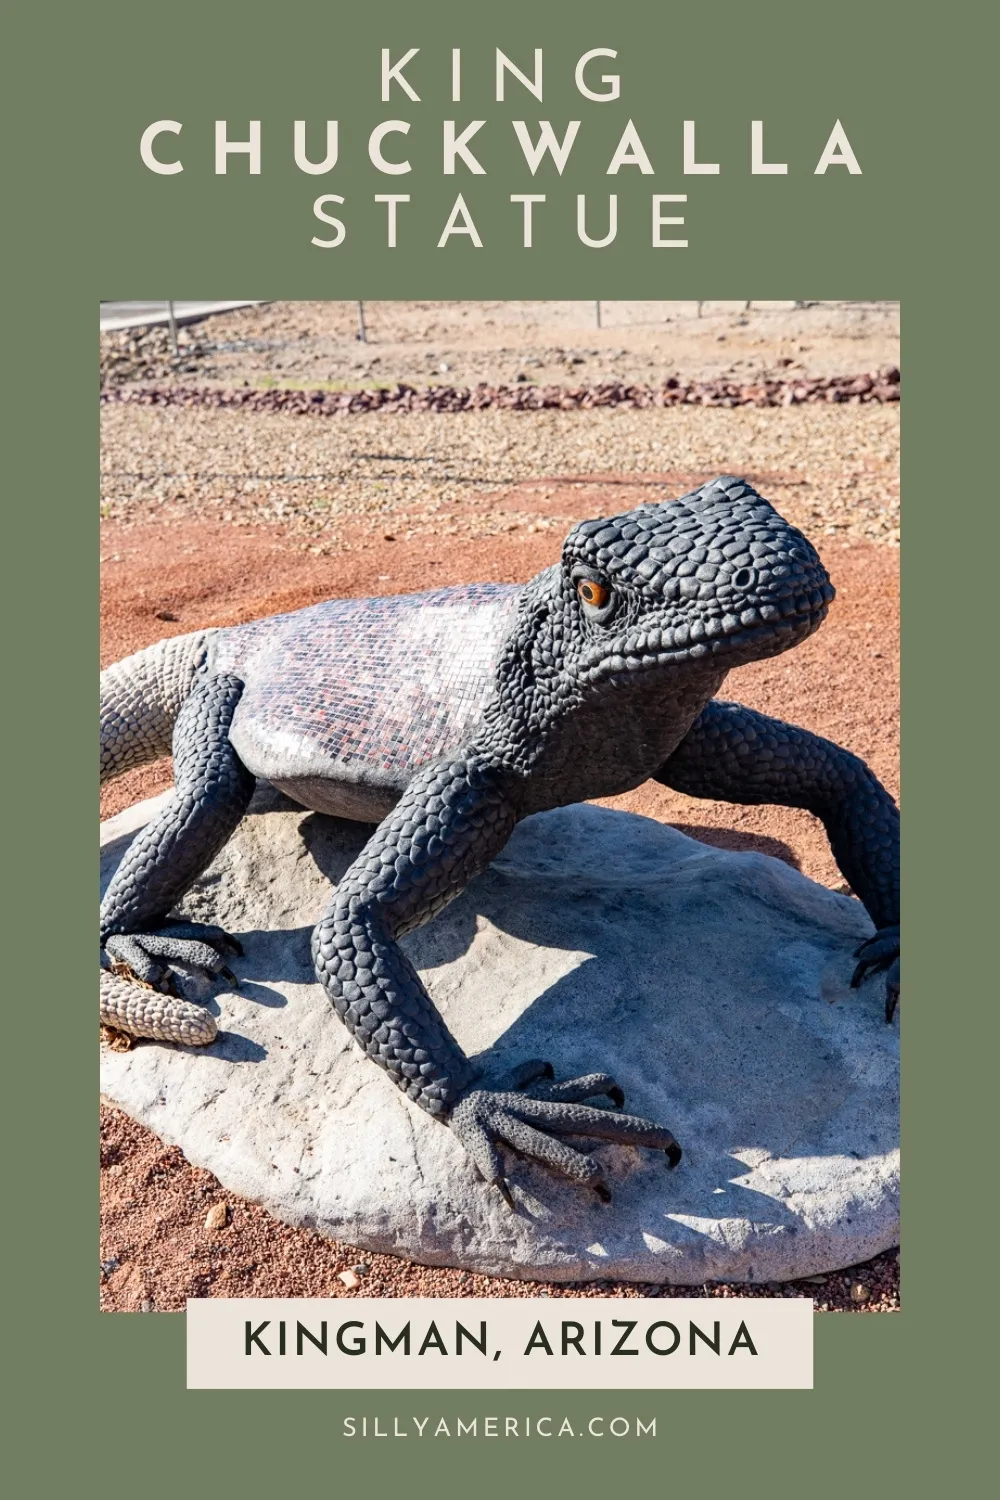 If you're driving through Arizona on a Route 66 road trip, you might find a few native chuckwalla lizards on the side of the road. But I guarantee you won't find any bigger than this one: the King Chuckwalla Statue in Kingman, Arizona. Visit this Arizona roadside attraction on your Route 66 road trip. Add it to your travelitinerary and bucket list! #Route66 #Route66RoadTrip #RoadsideAttraction #RoadsideAttractions #ArizonaRoadsideAttraction